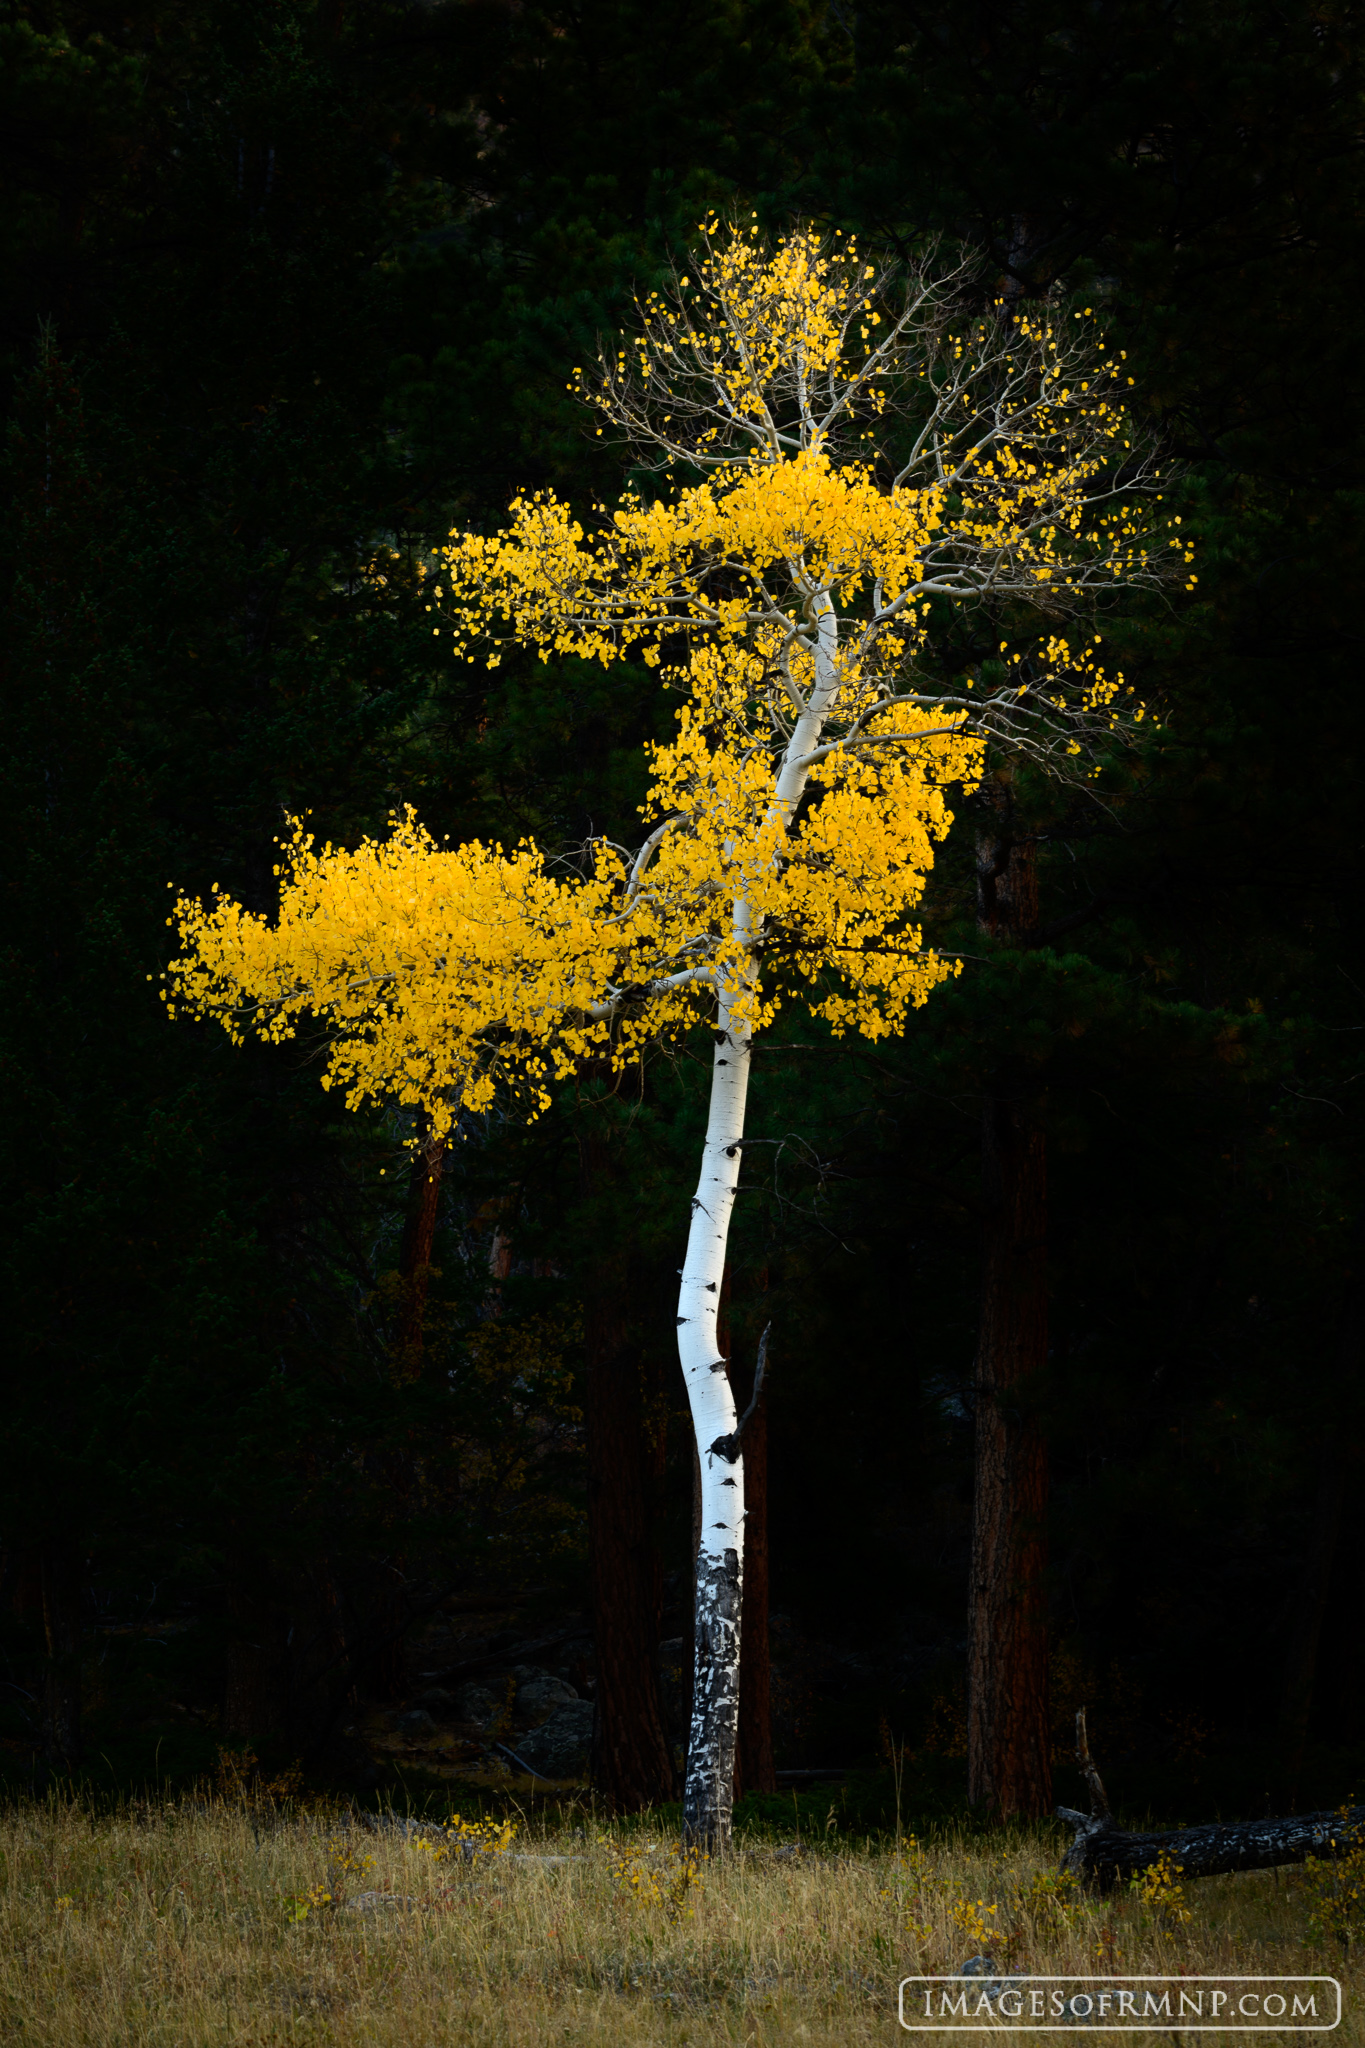 Over the years I've photographed this beautiful aspen tree many times. On this morning I saw that it was lit by diffused sunlight...